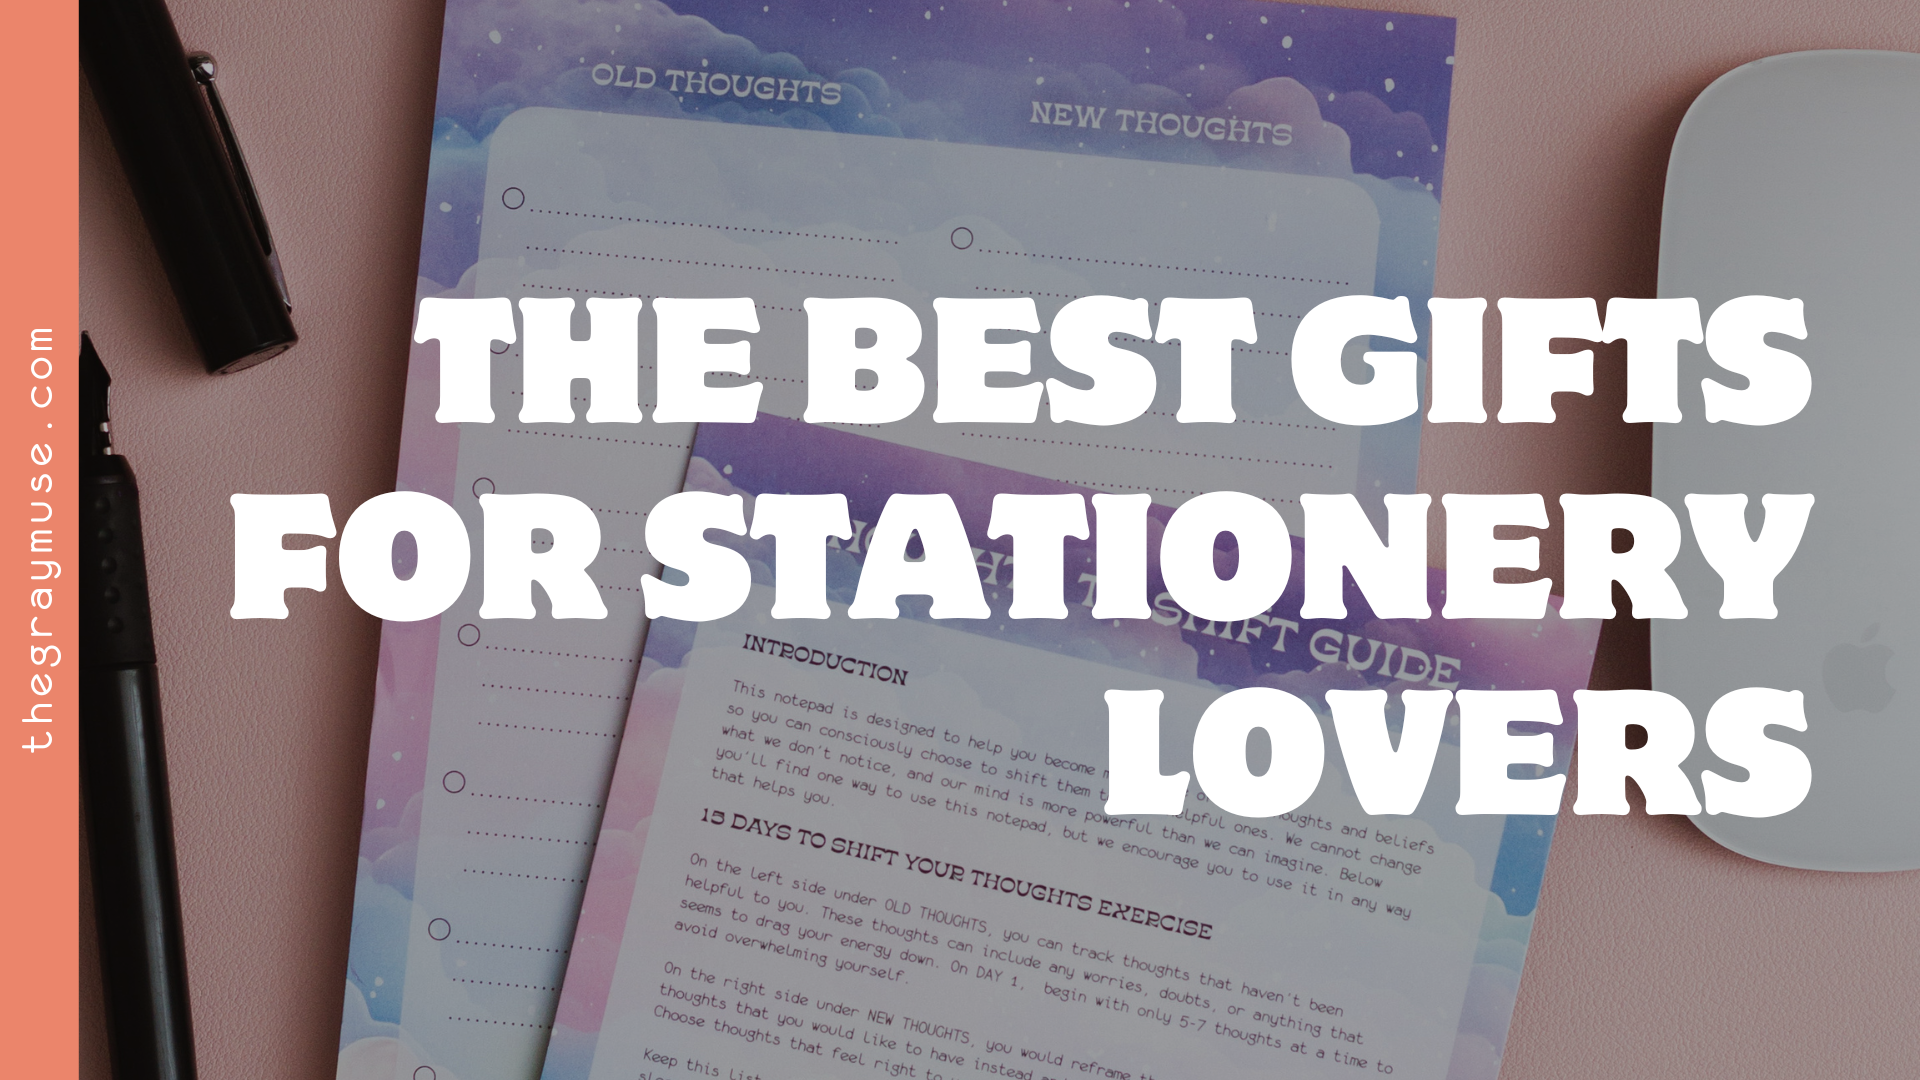 The Best Gifts for Stationery Lovers blog